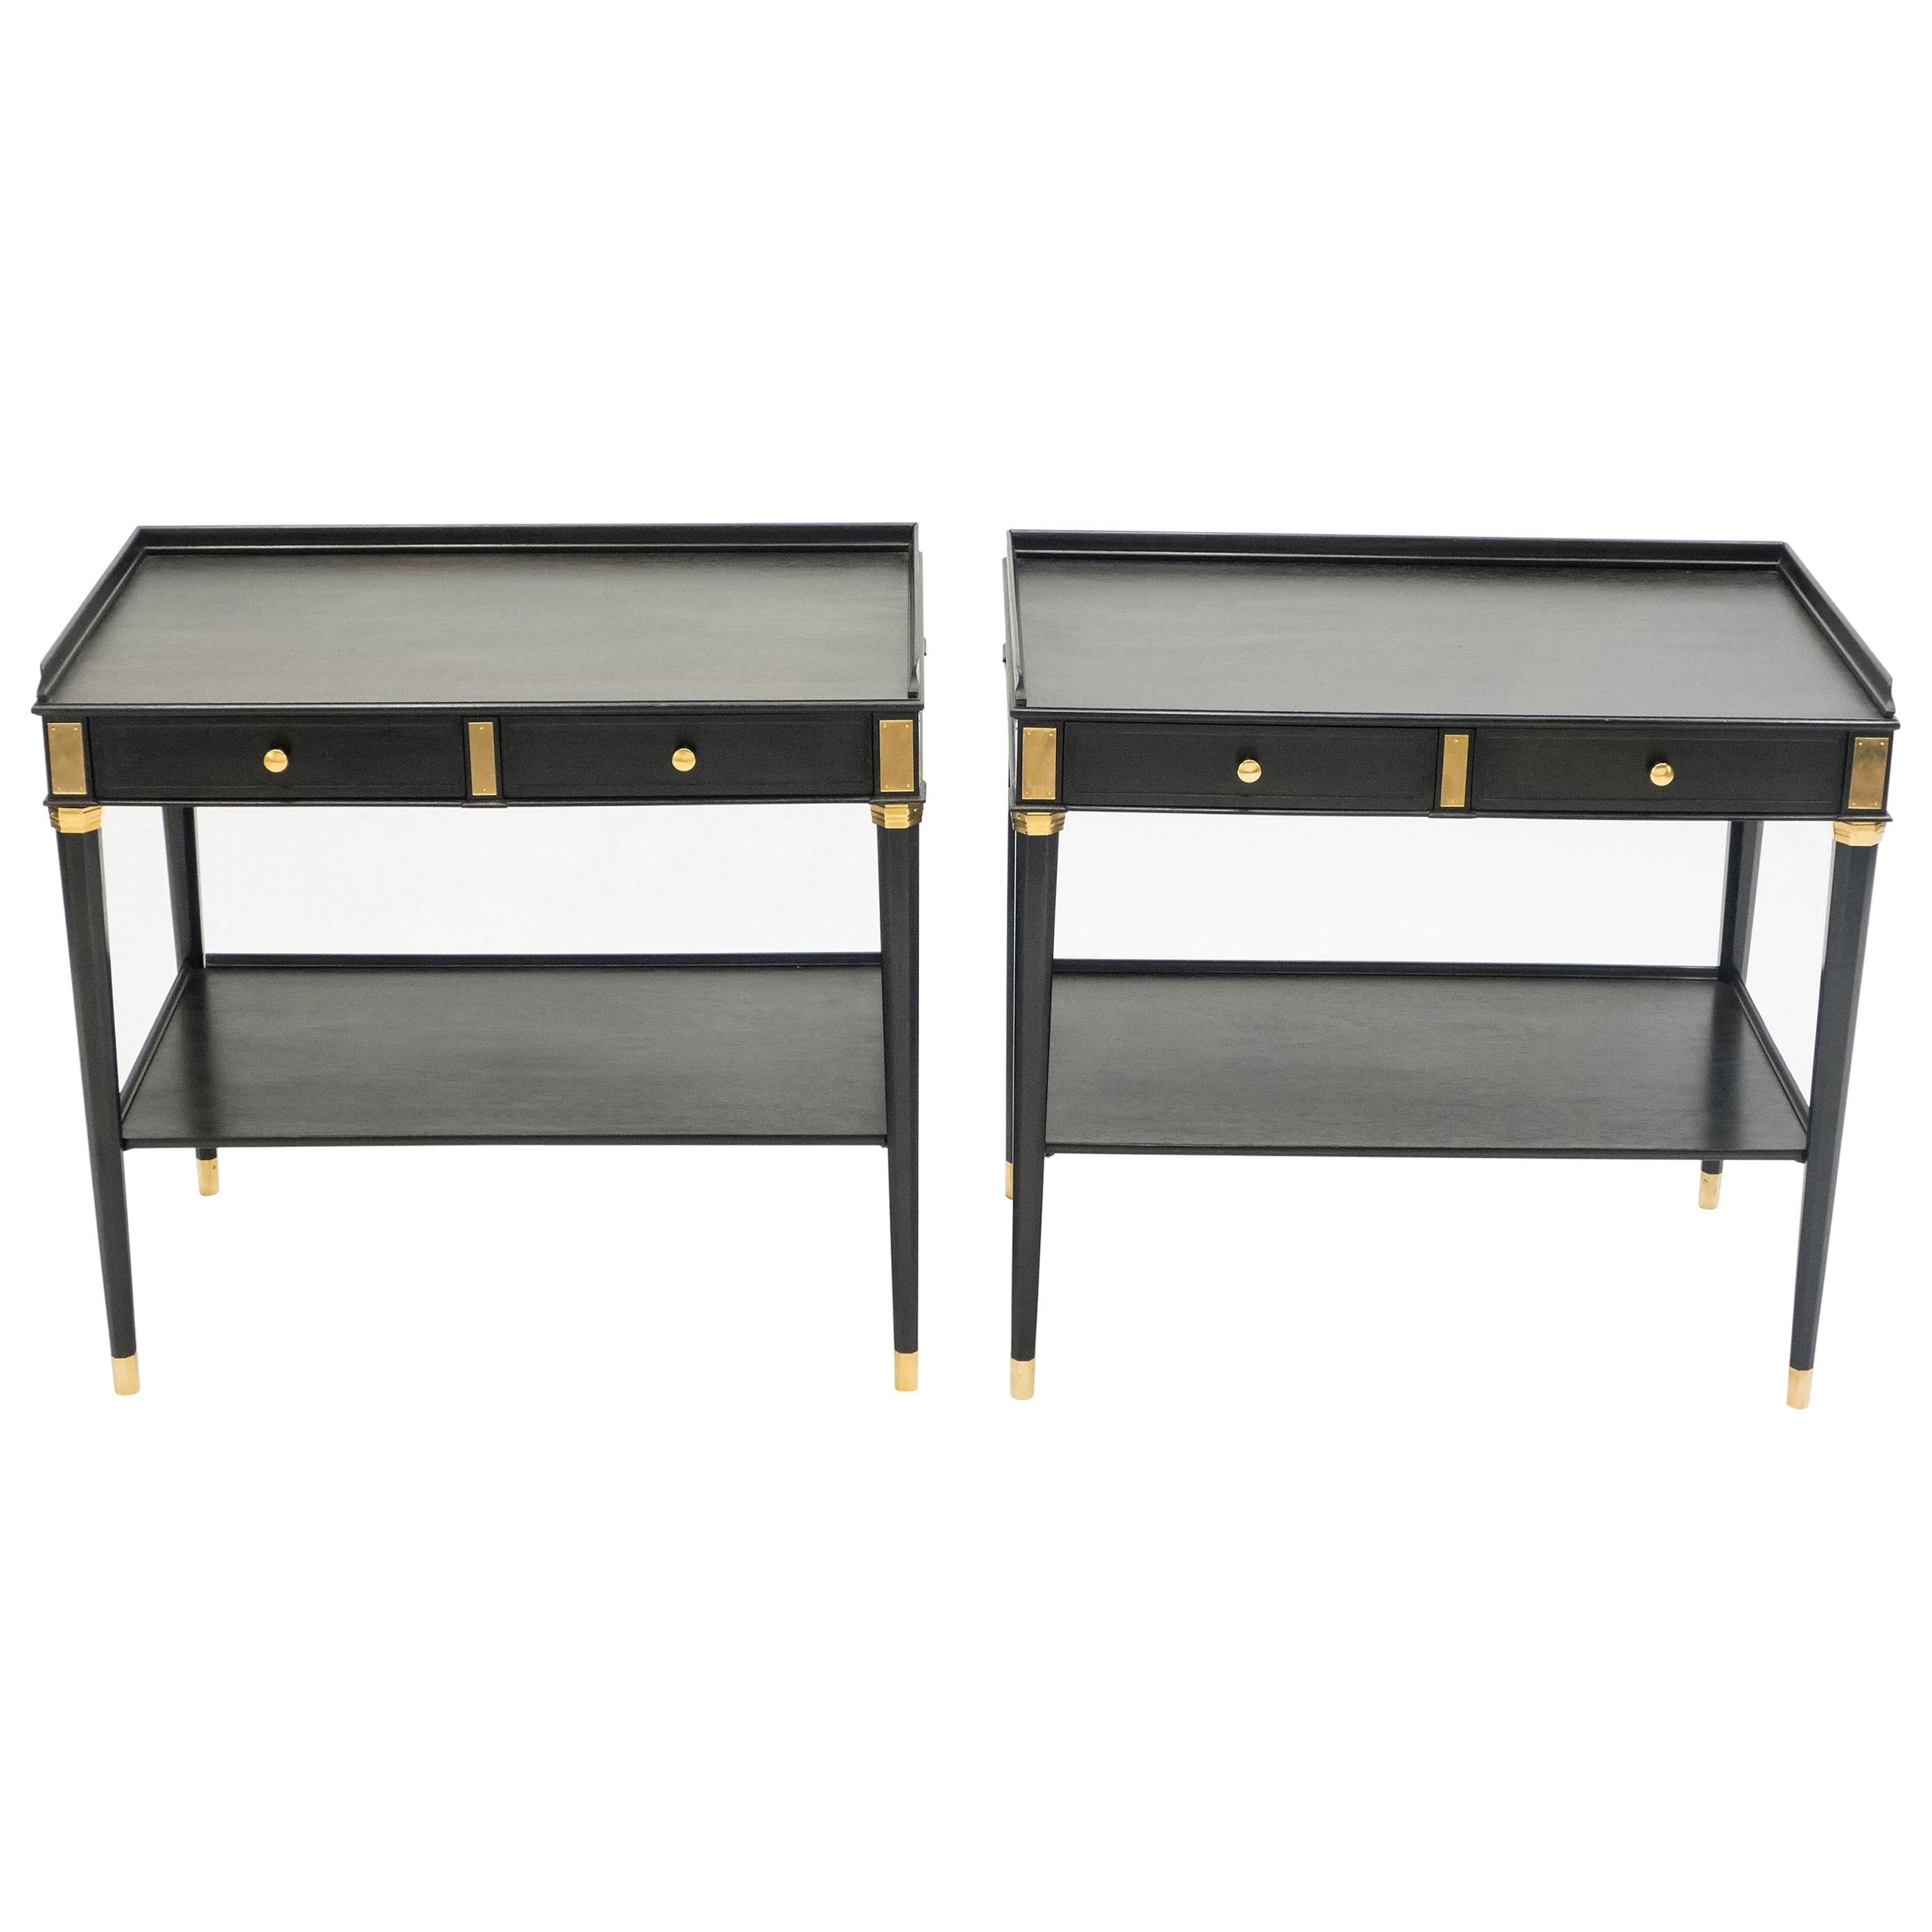 Rare Pair of Stamped Maison Jansen Black Wood Brass End Tables, 1950s